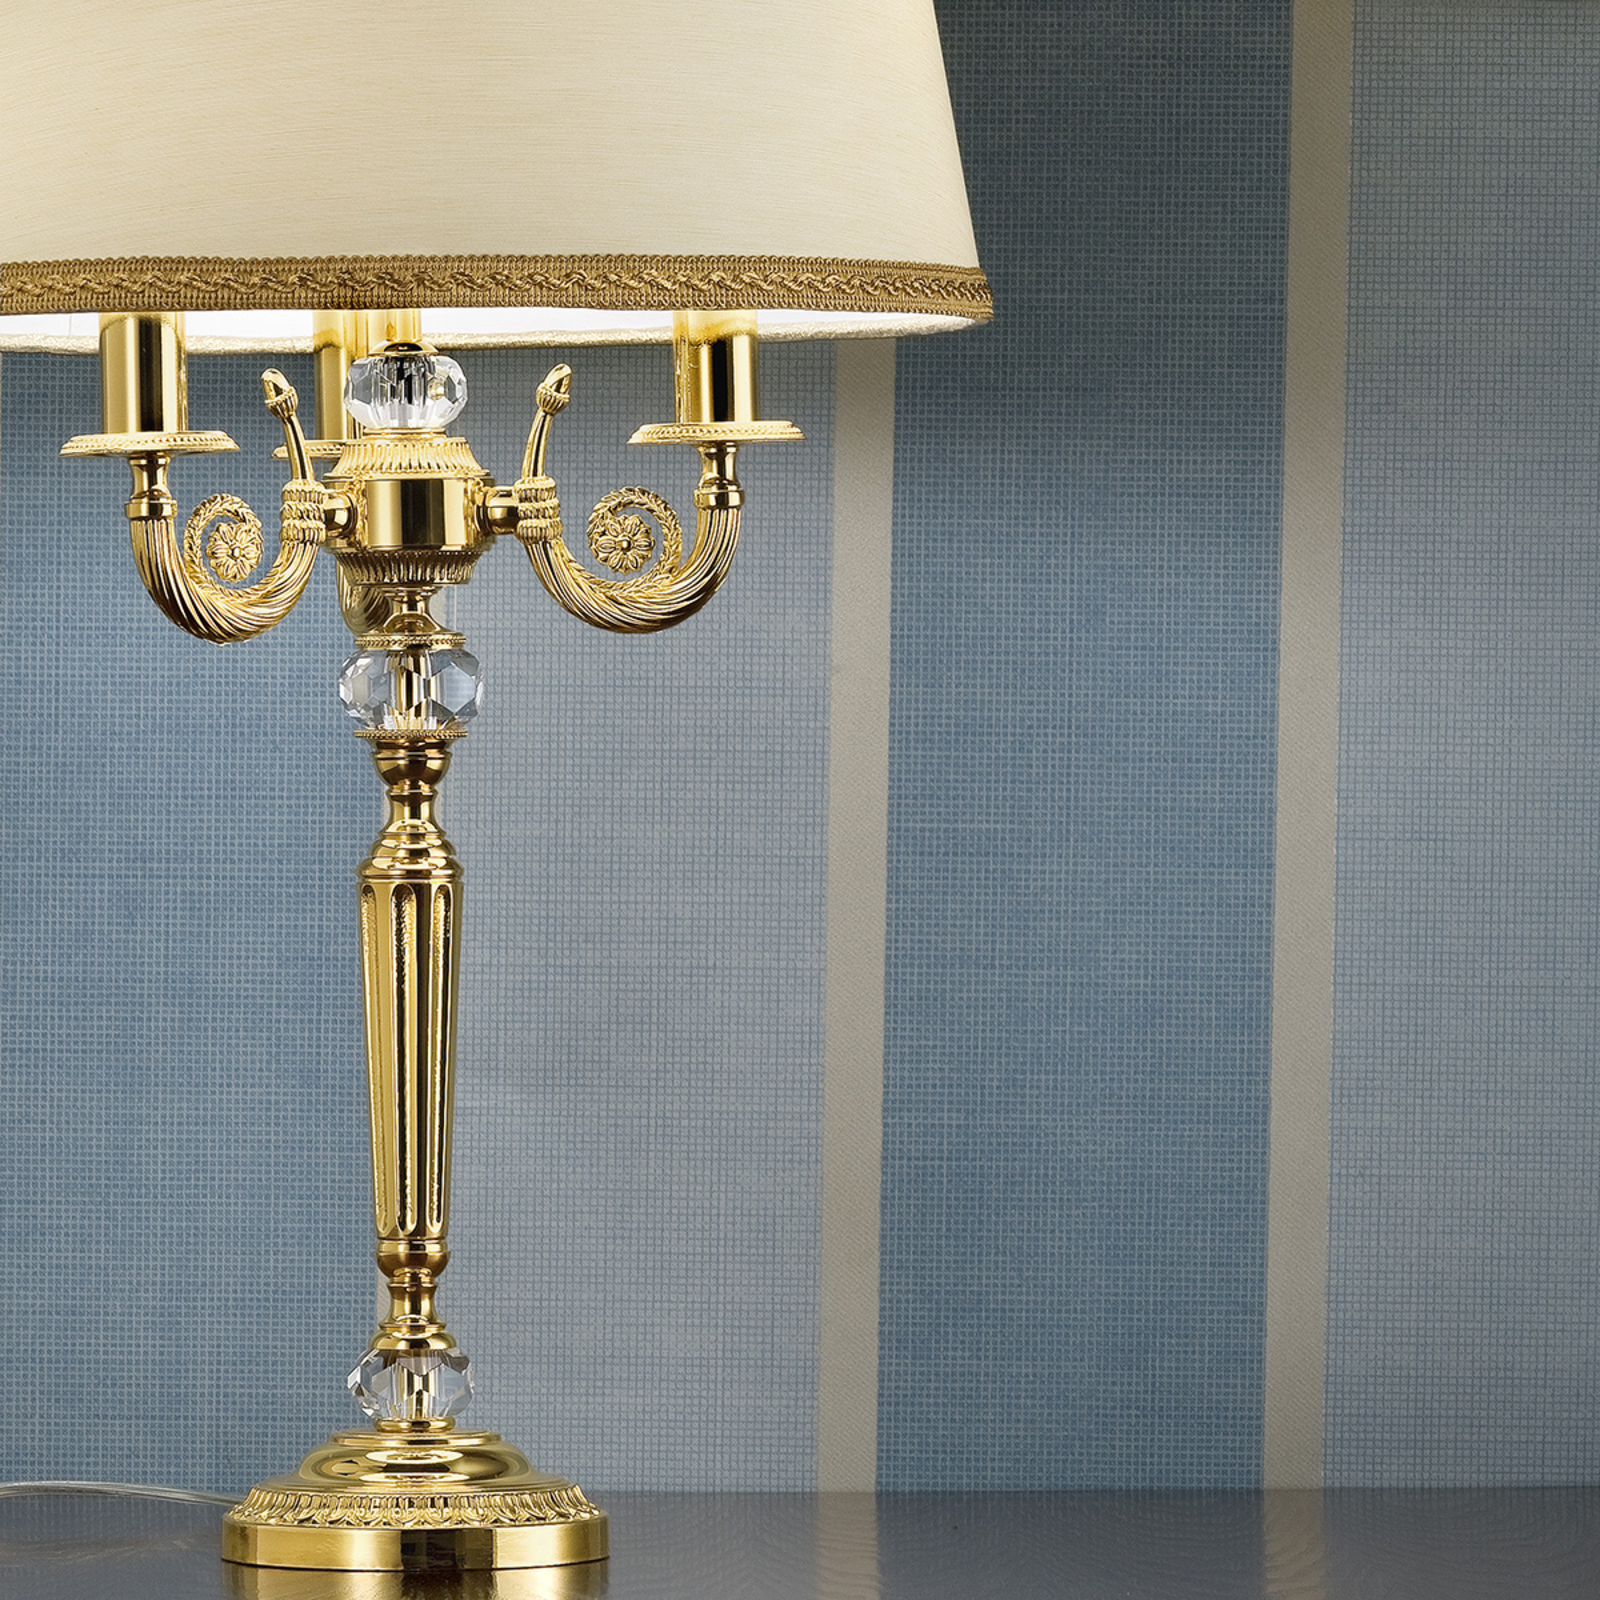 Marvine noble table lamp, gold-plate